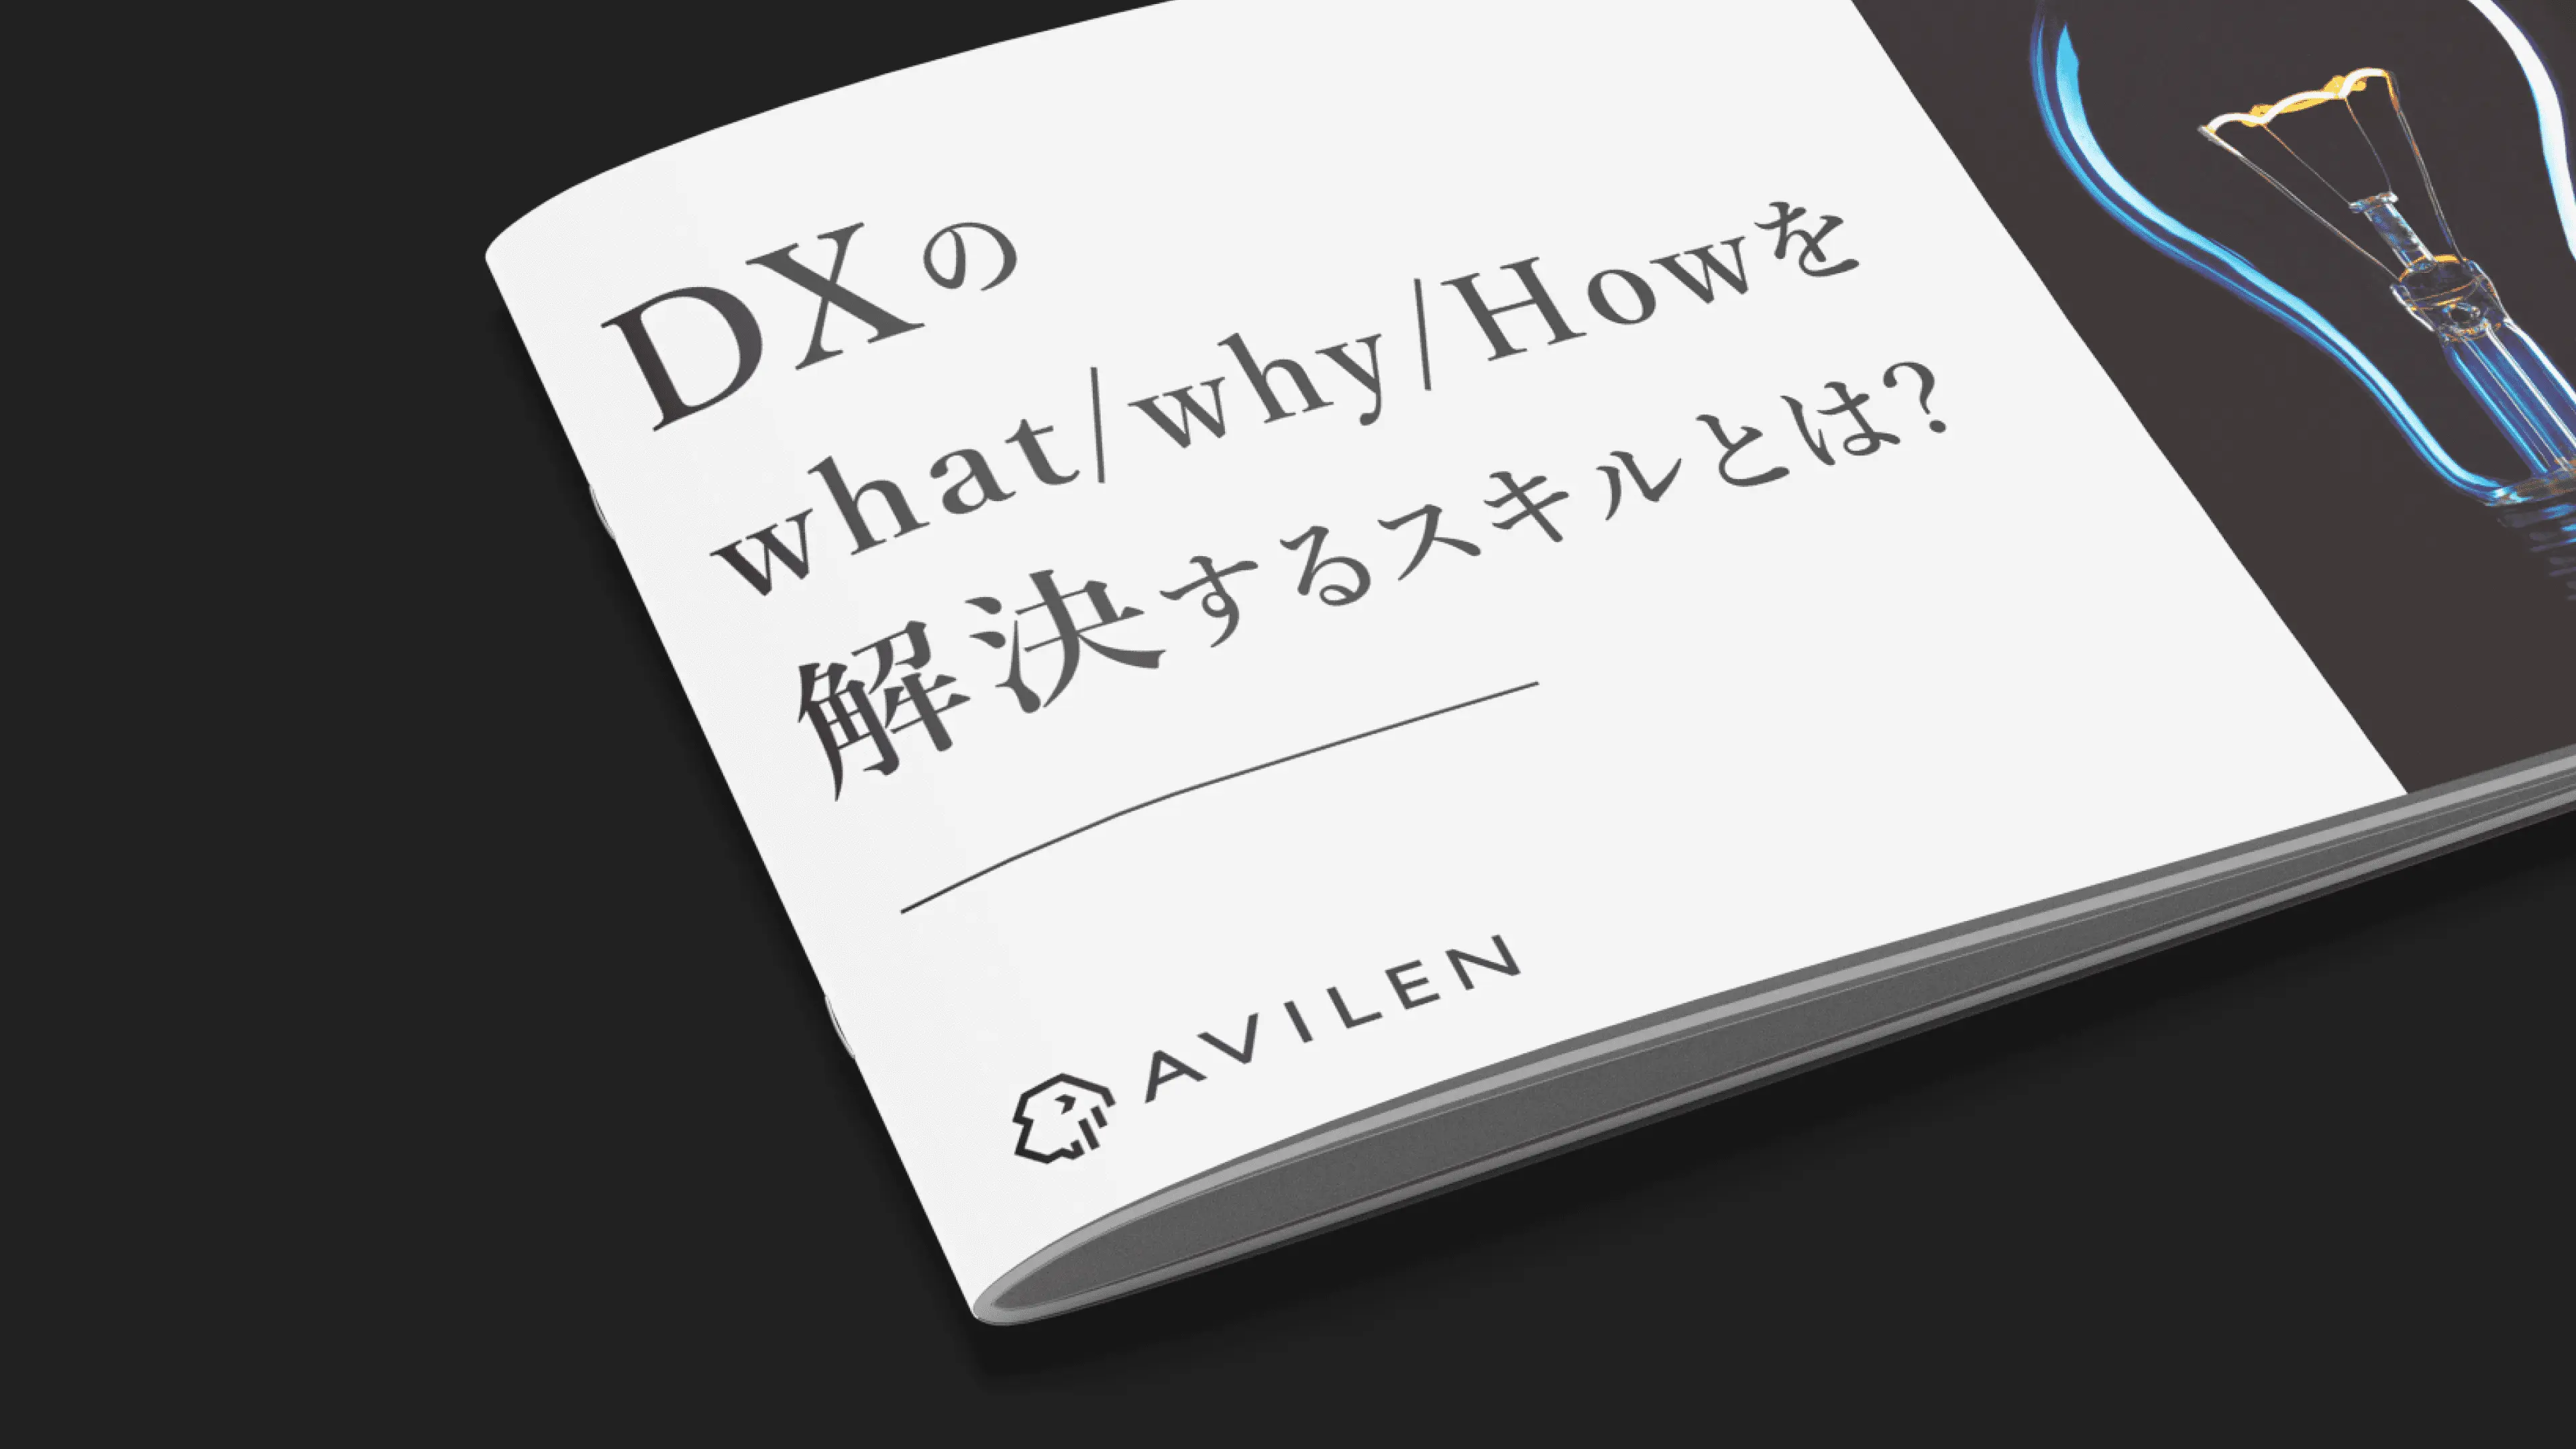 DXのWhat/Why/Howを解決するスキルとは？｜サービス紹介資料